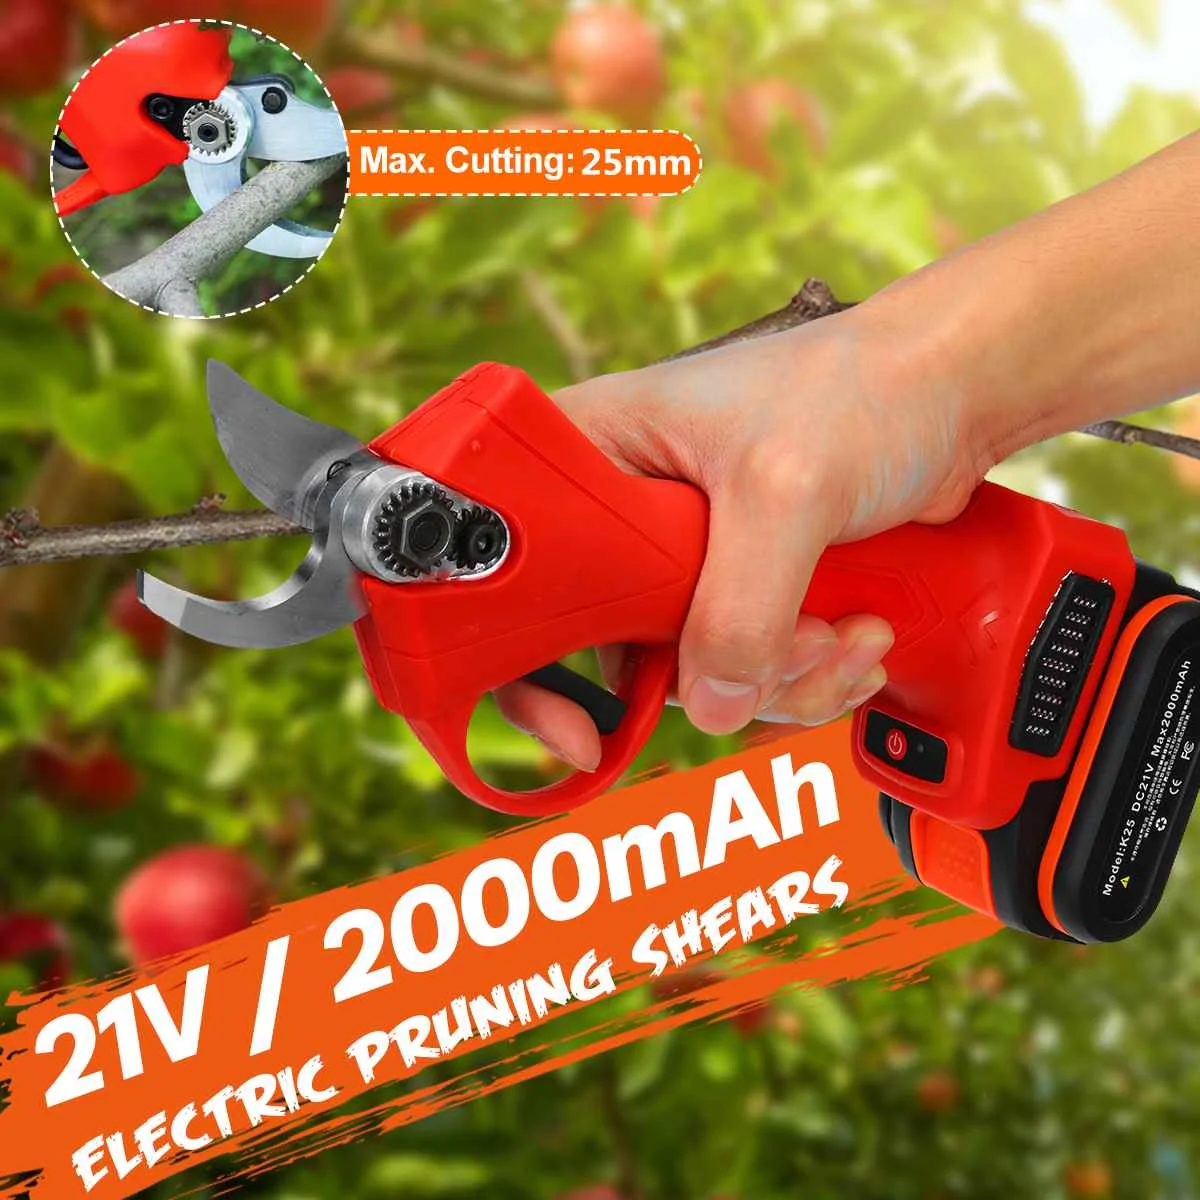 

Home Cordless Electric Pruning Shears Electric Pruner Garden Scissors Tools Secateur 21V Rechargeable Battery Pruning Shears